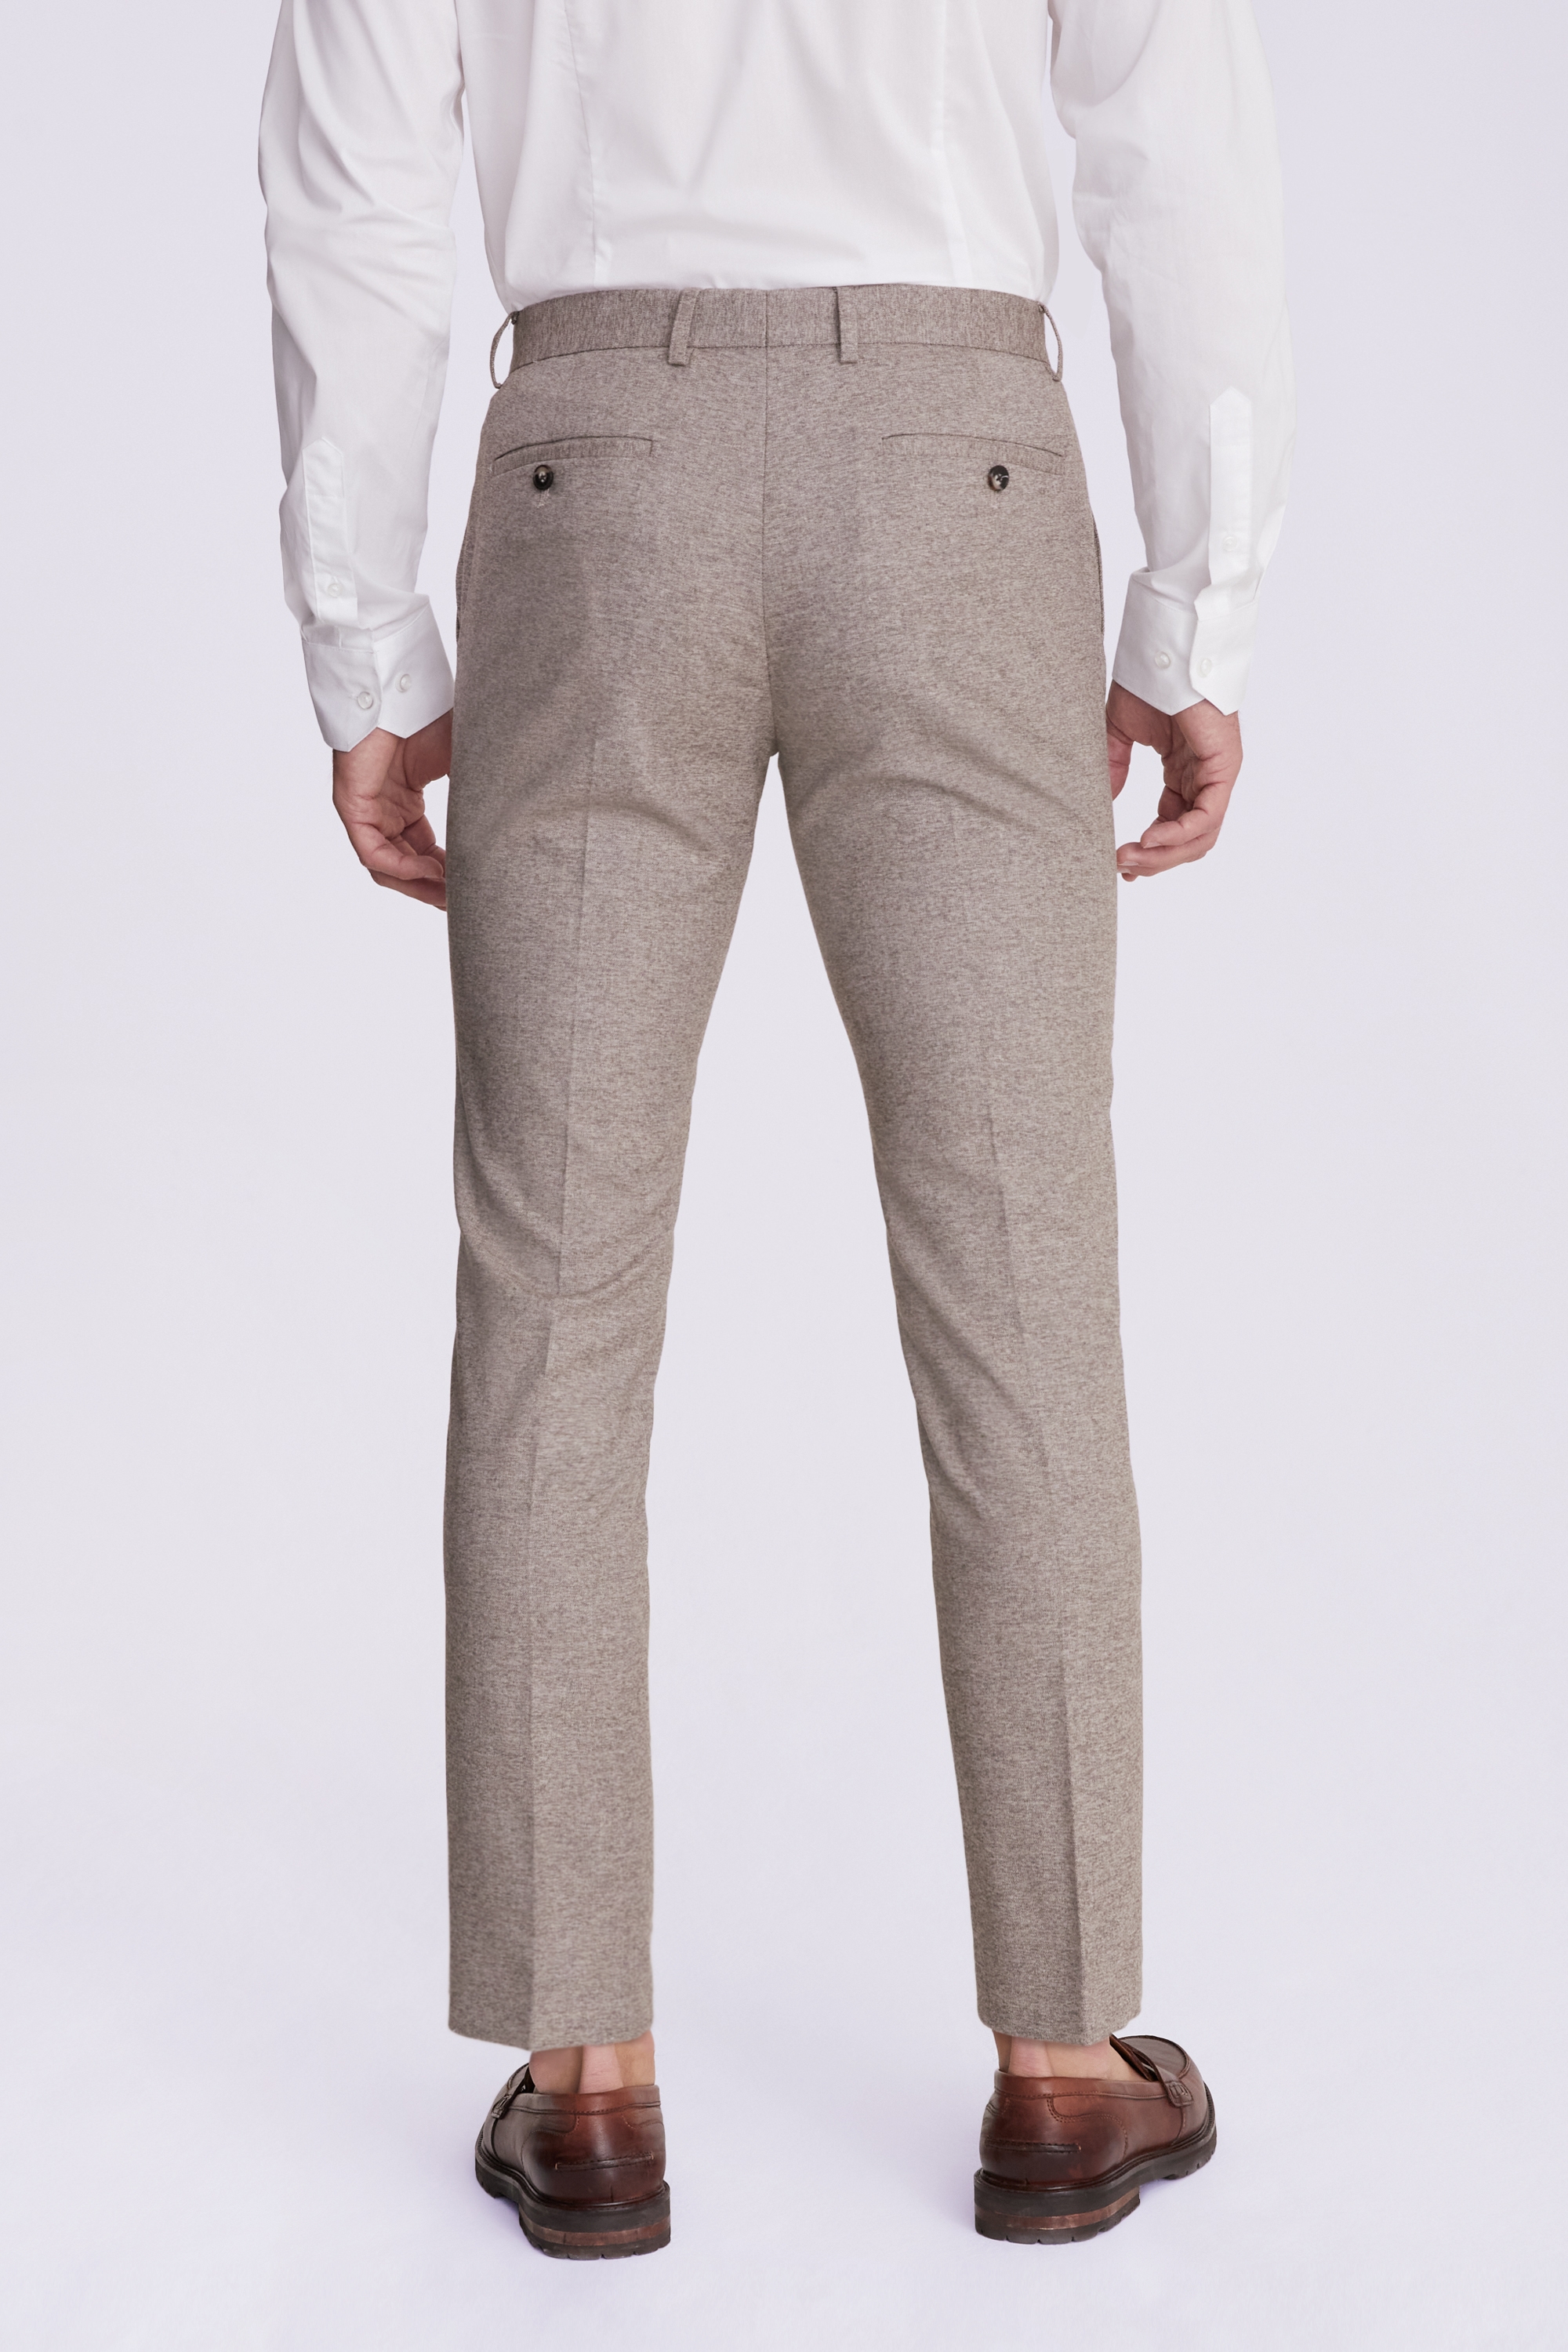 Slim Neutral Trousers | Buy Online at Moss